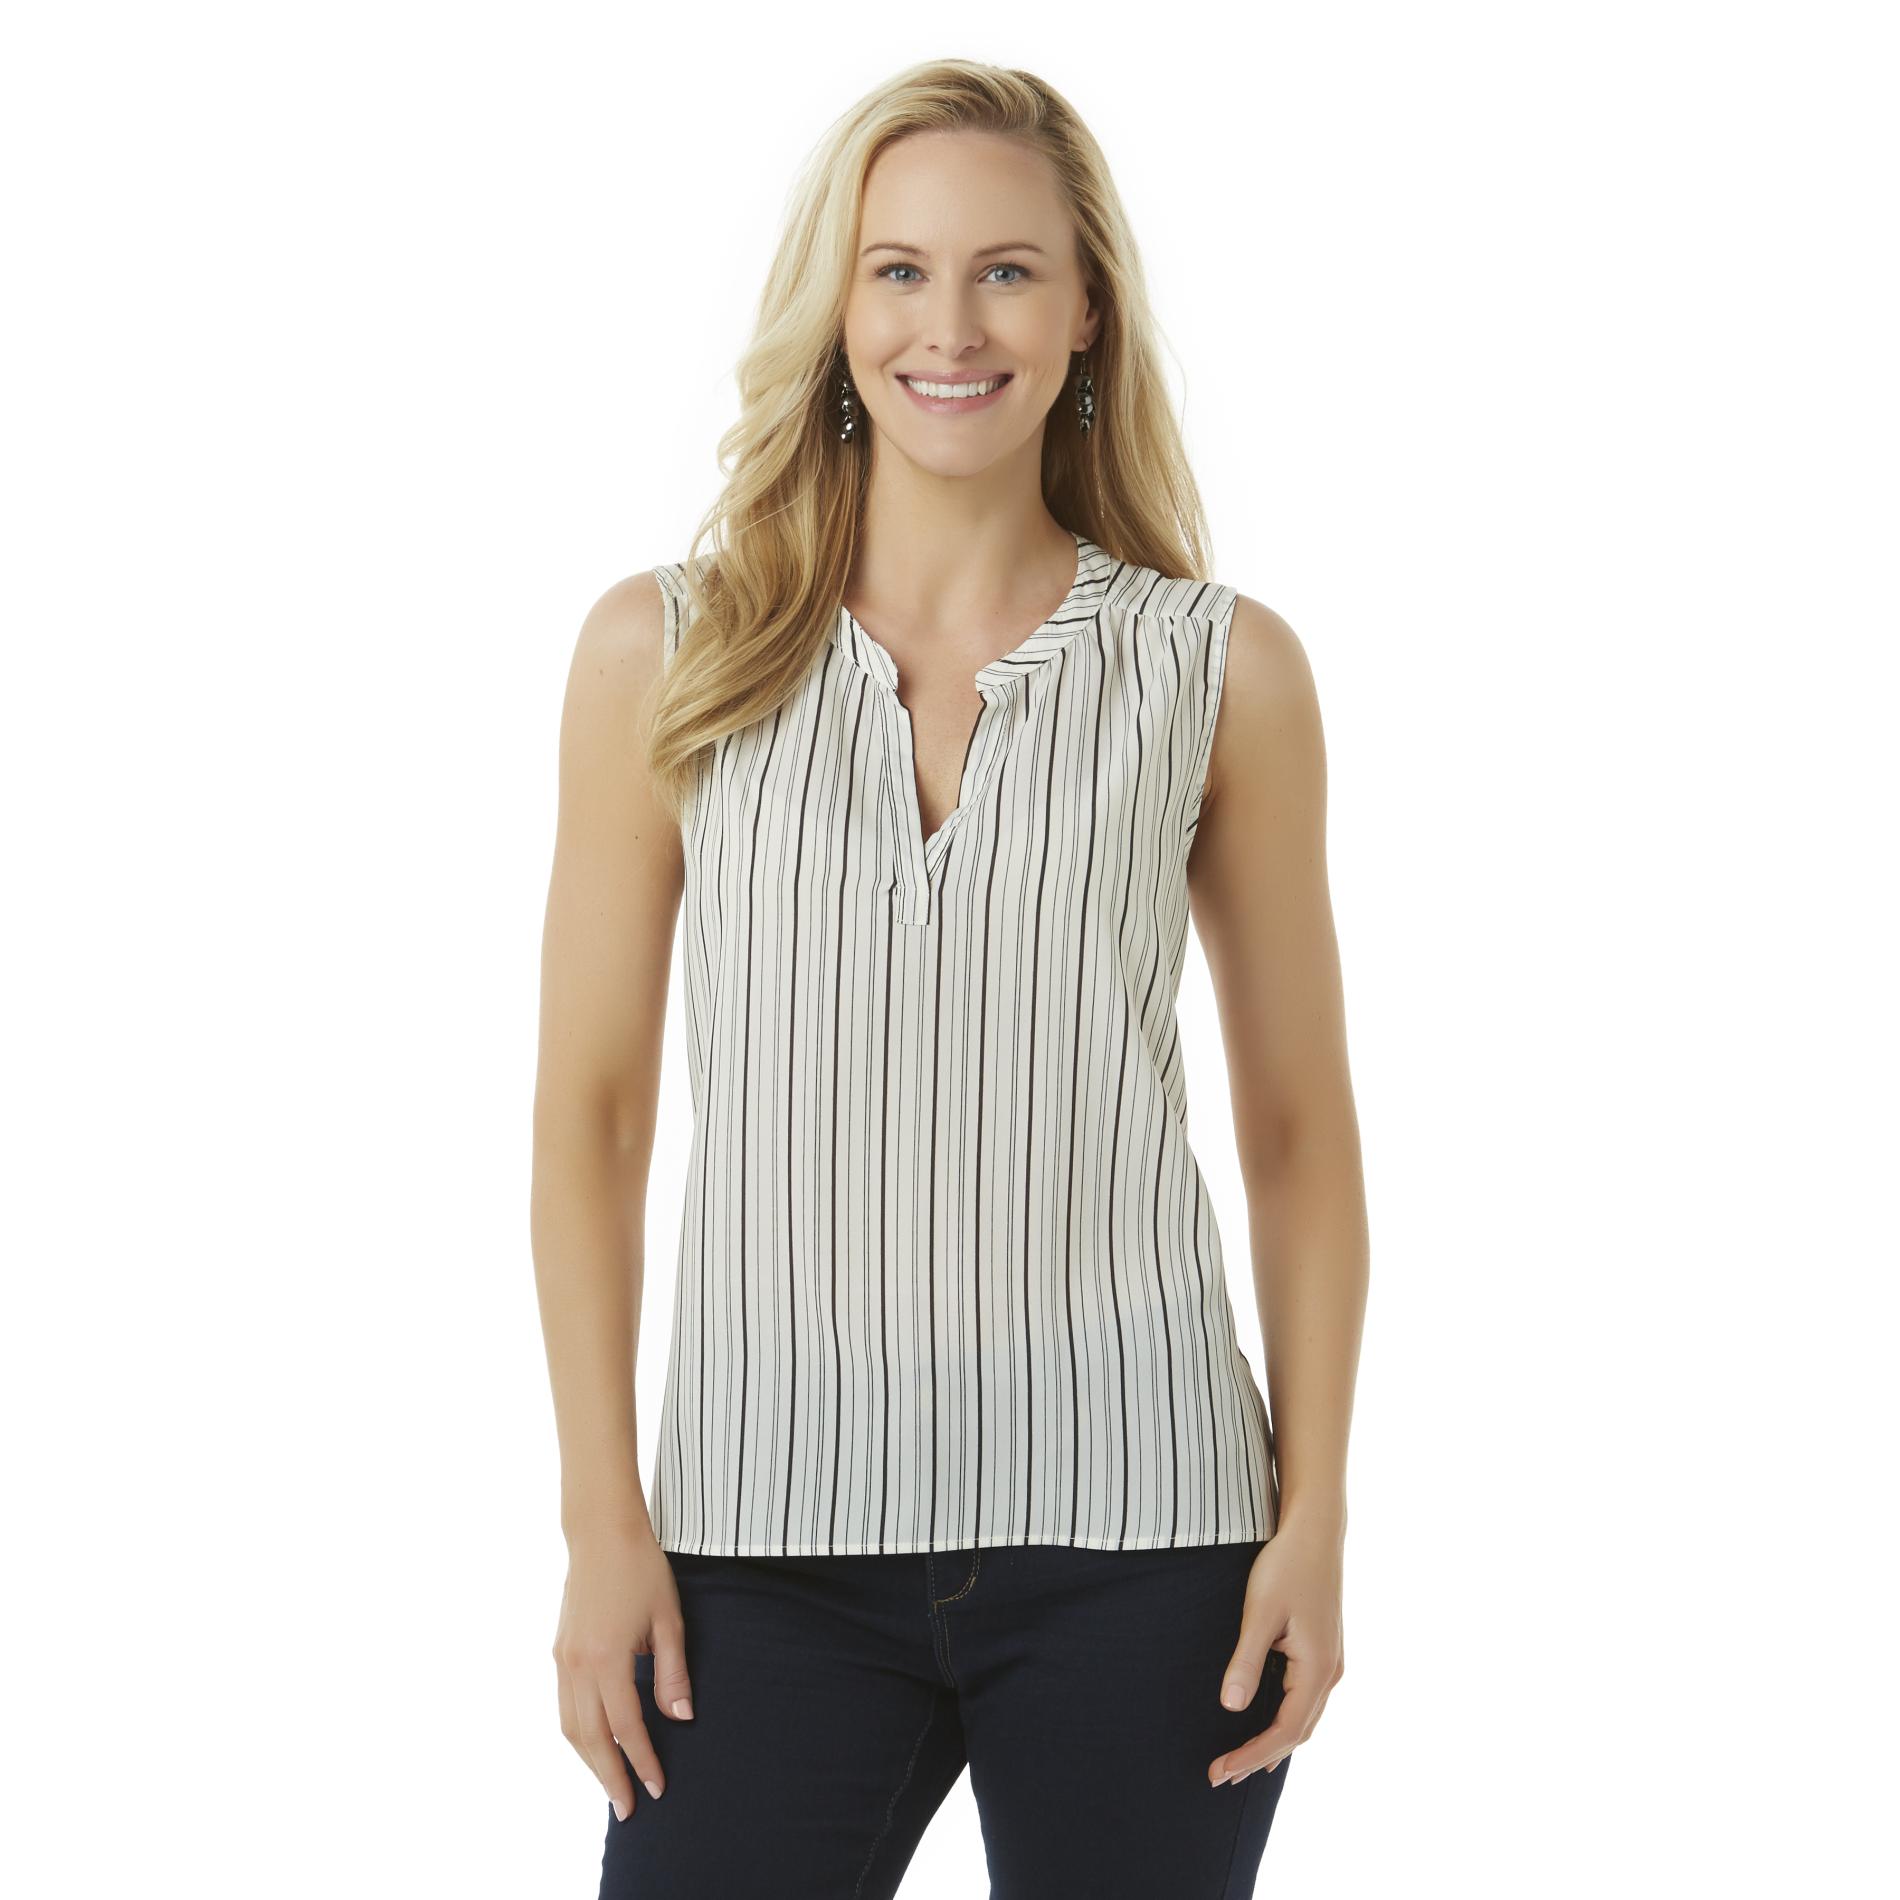 Simply Styled Women's Sleeveless Blouse - Striped